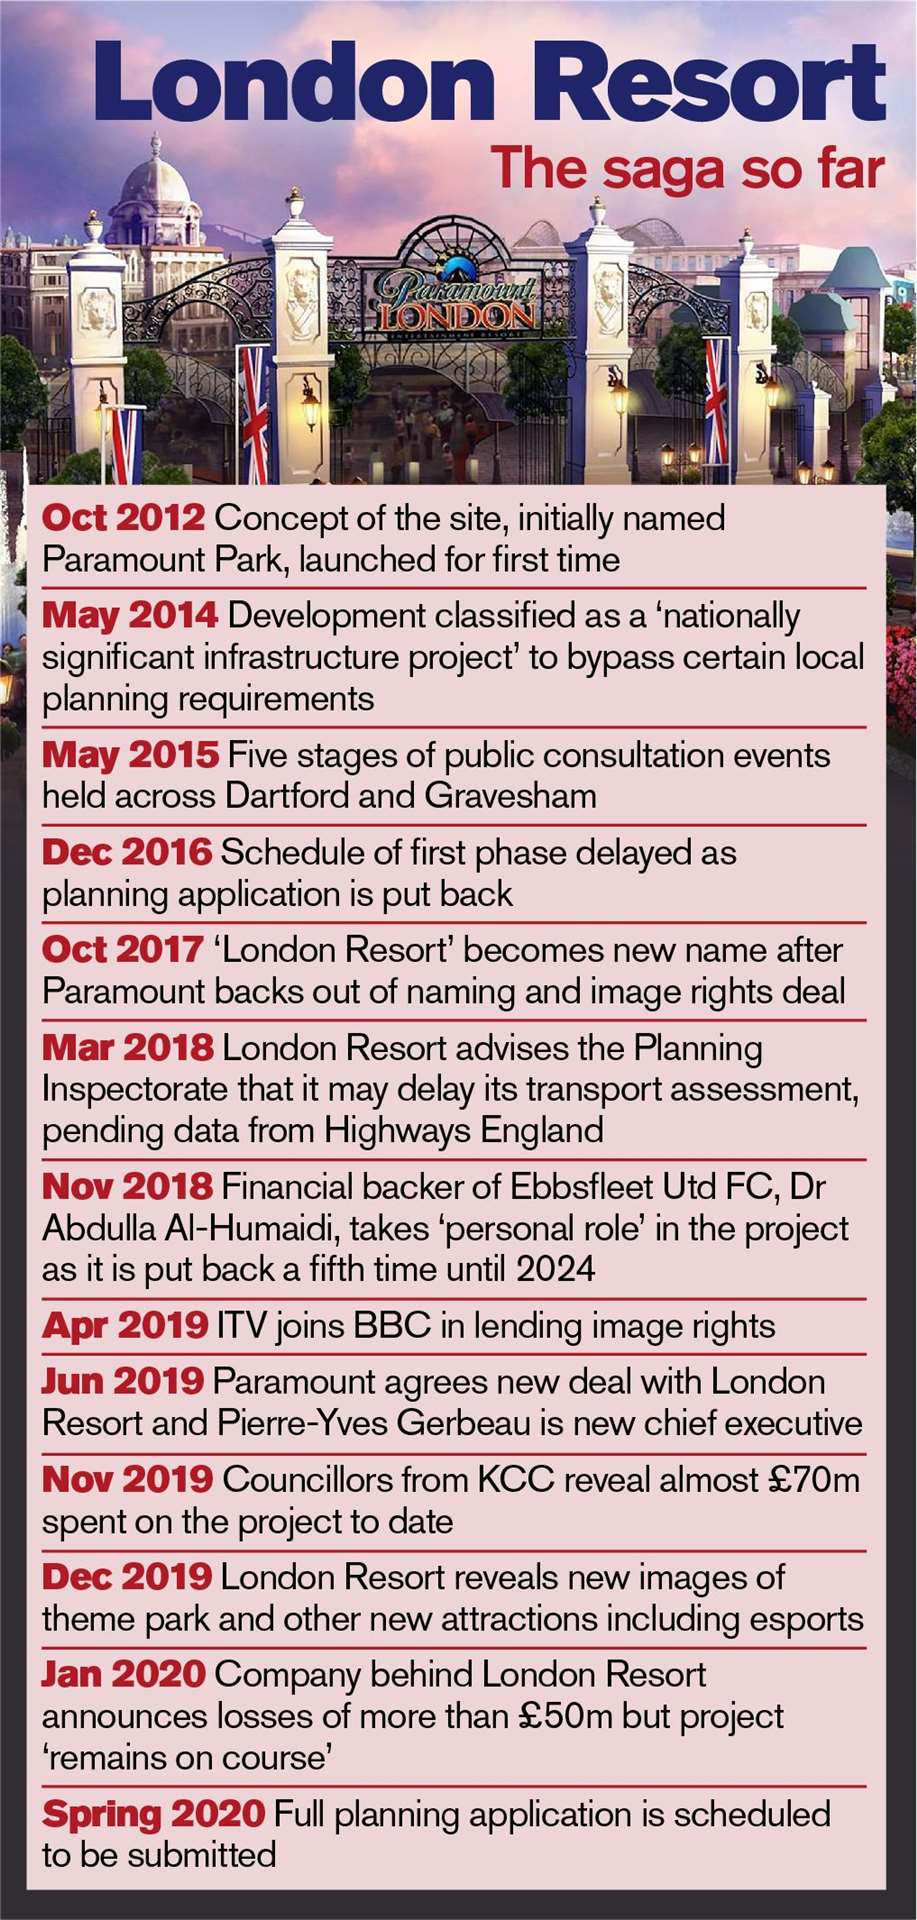 A timeline of developments relating to the London Resort project to date.